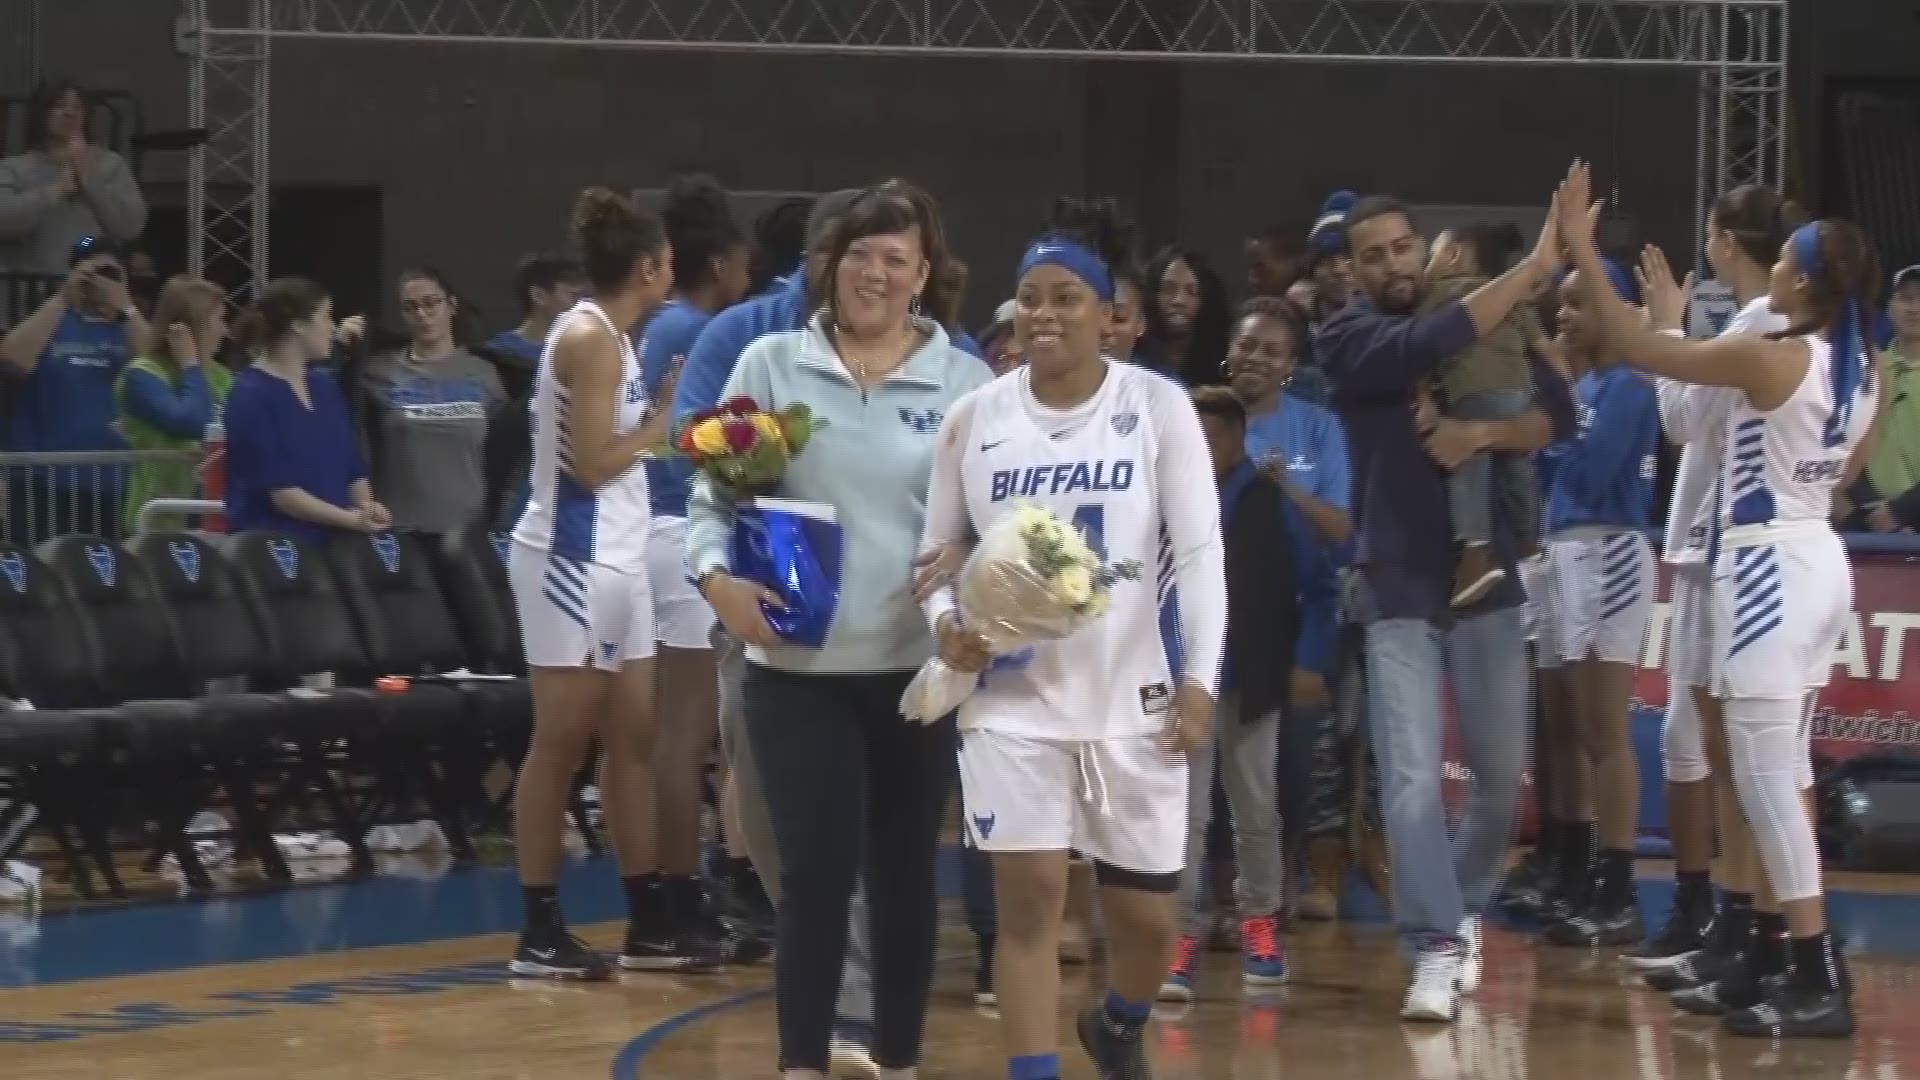 After an 86-61 win over MAC leading Miami (OH), UB celebrated its five seniors Cierra Dillard, Autumn Jones, Ayoleka Sodade, Brittany Morrison and Courtney Wilkins.